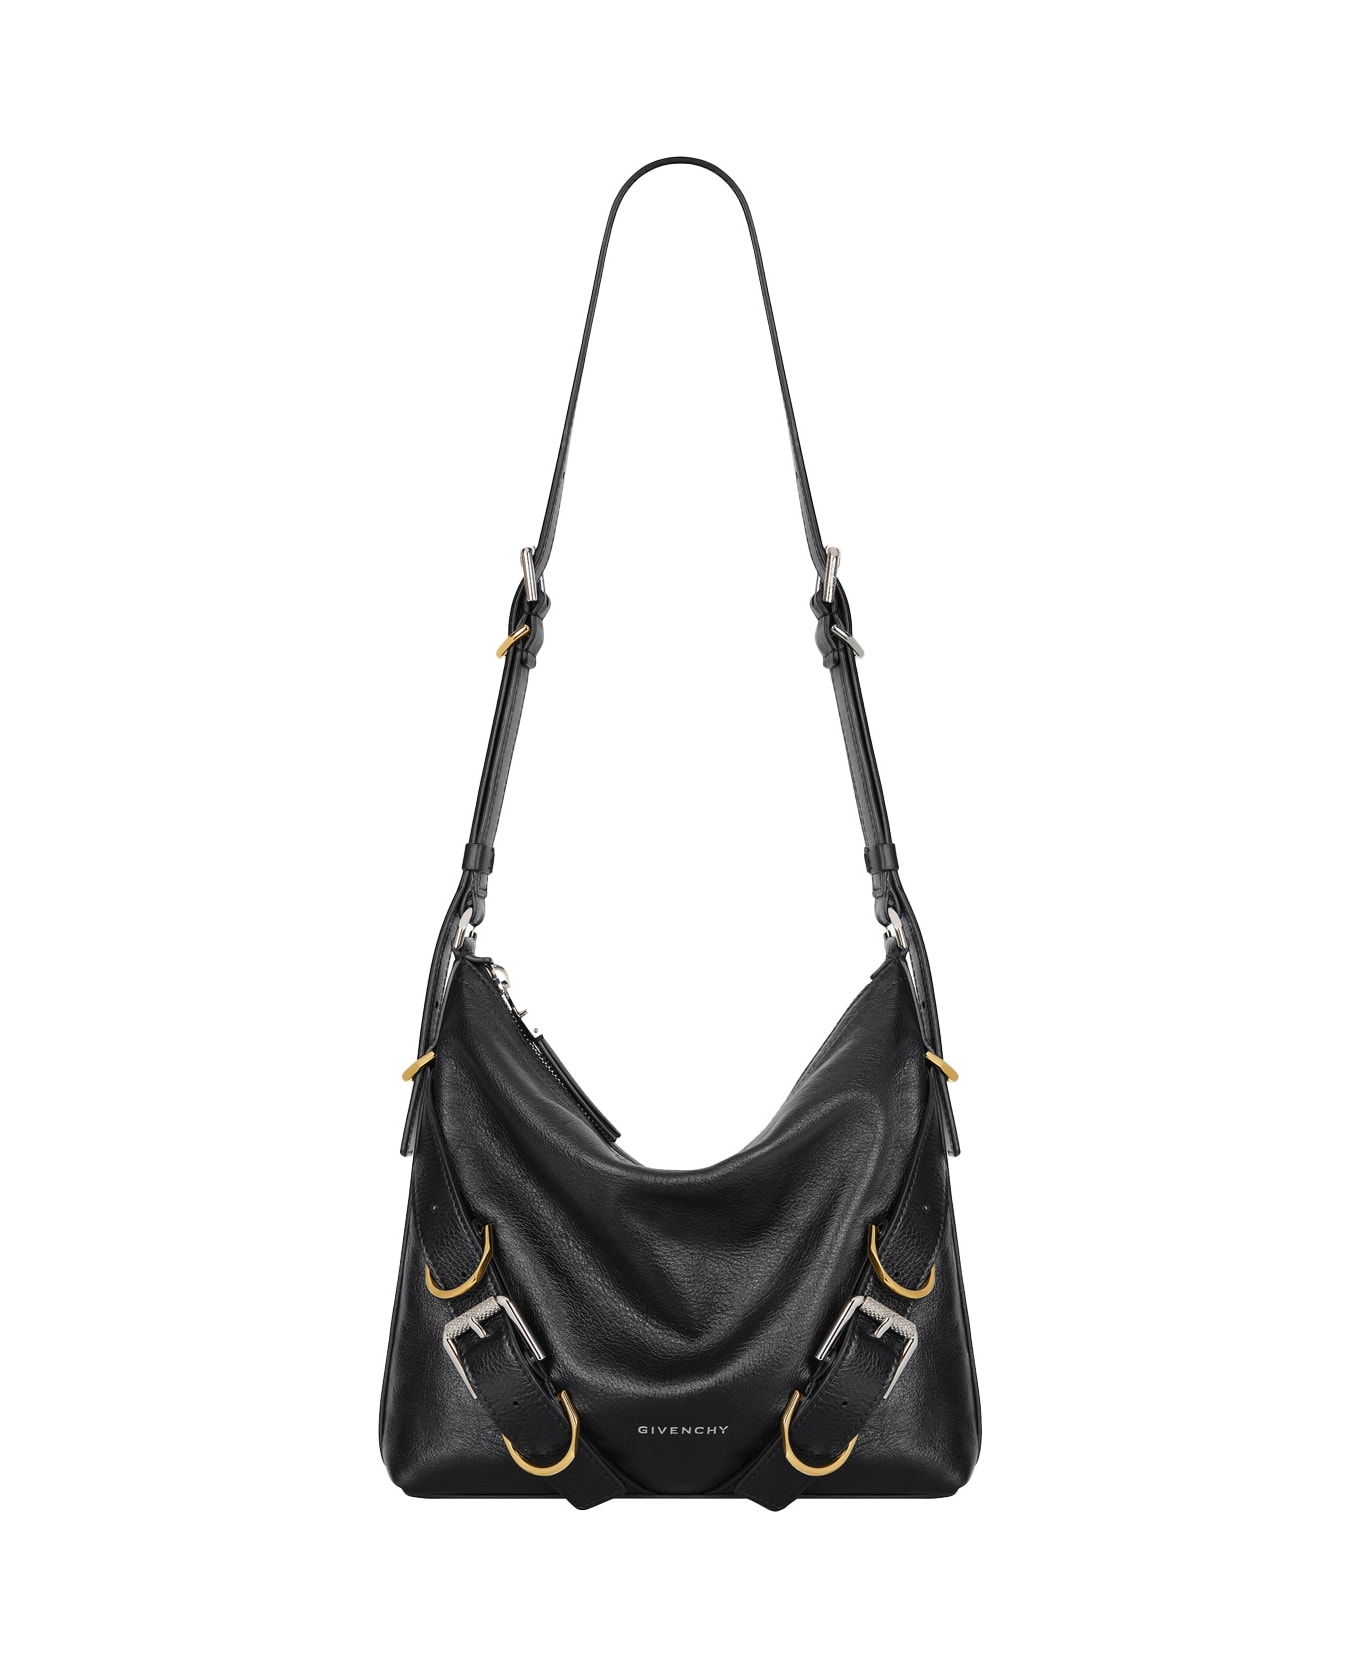 Givenchy Voyou Crossbody Bag In Black Leather - Black